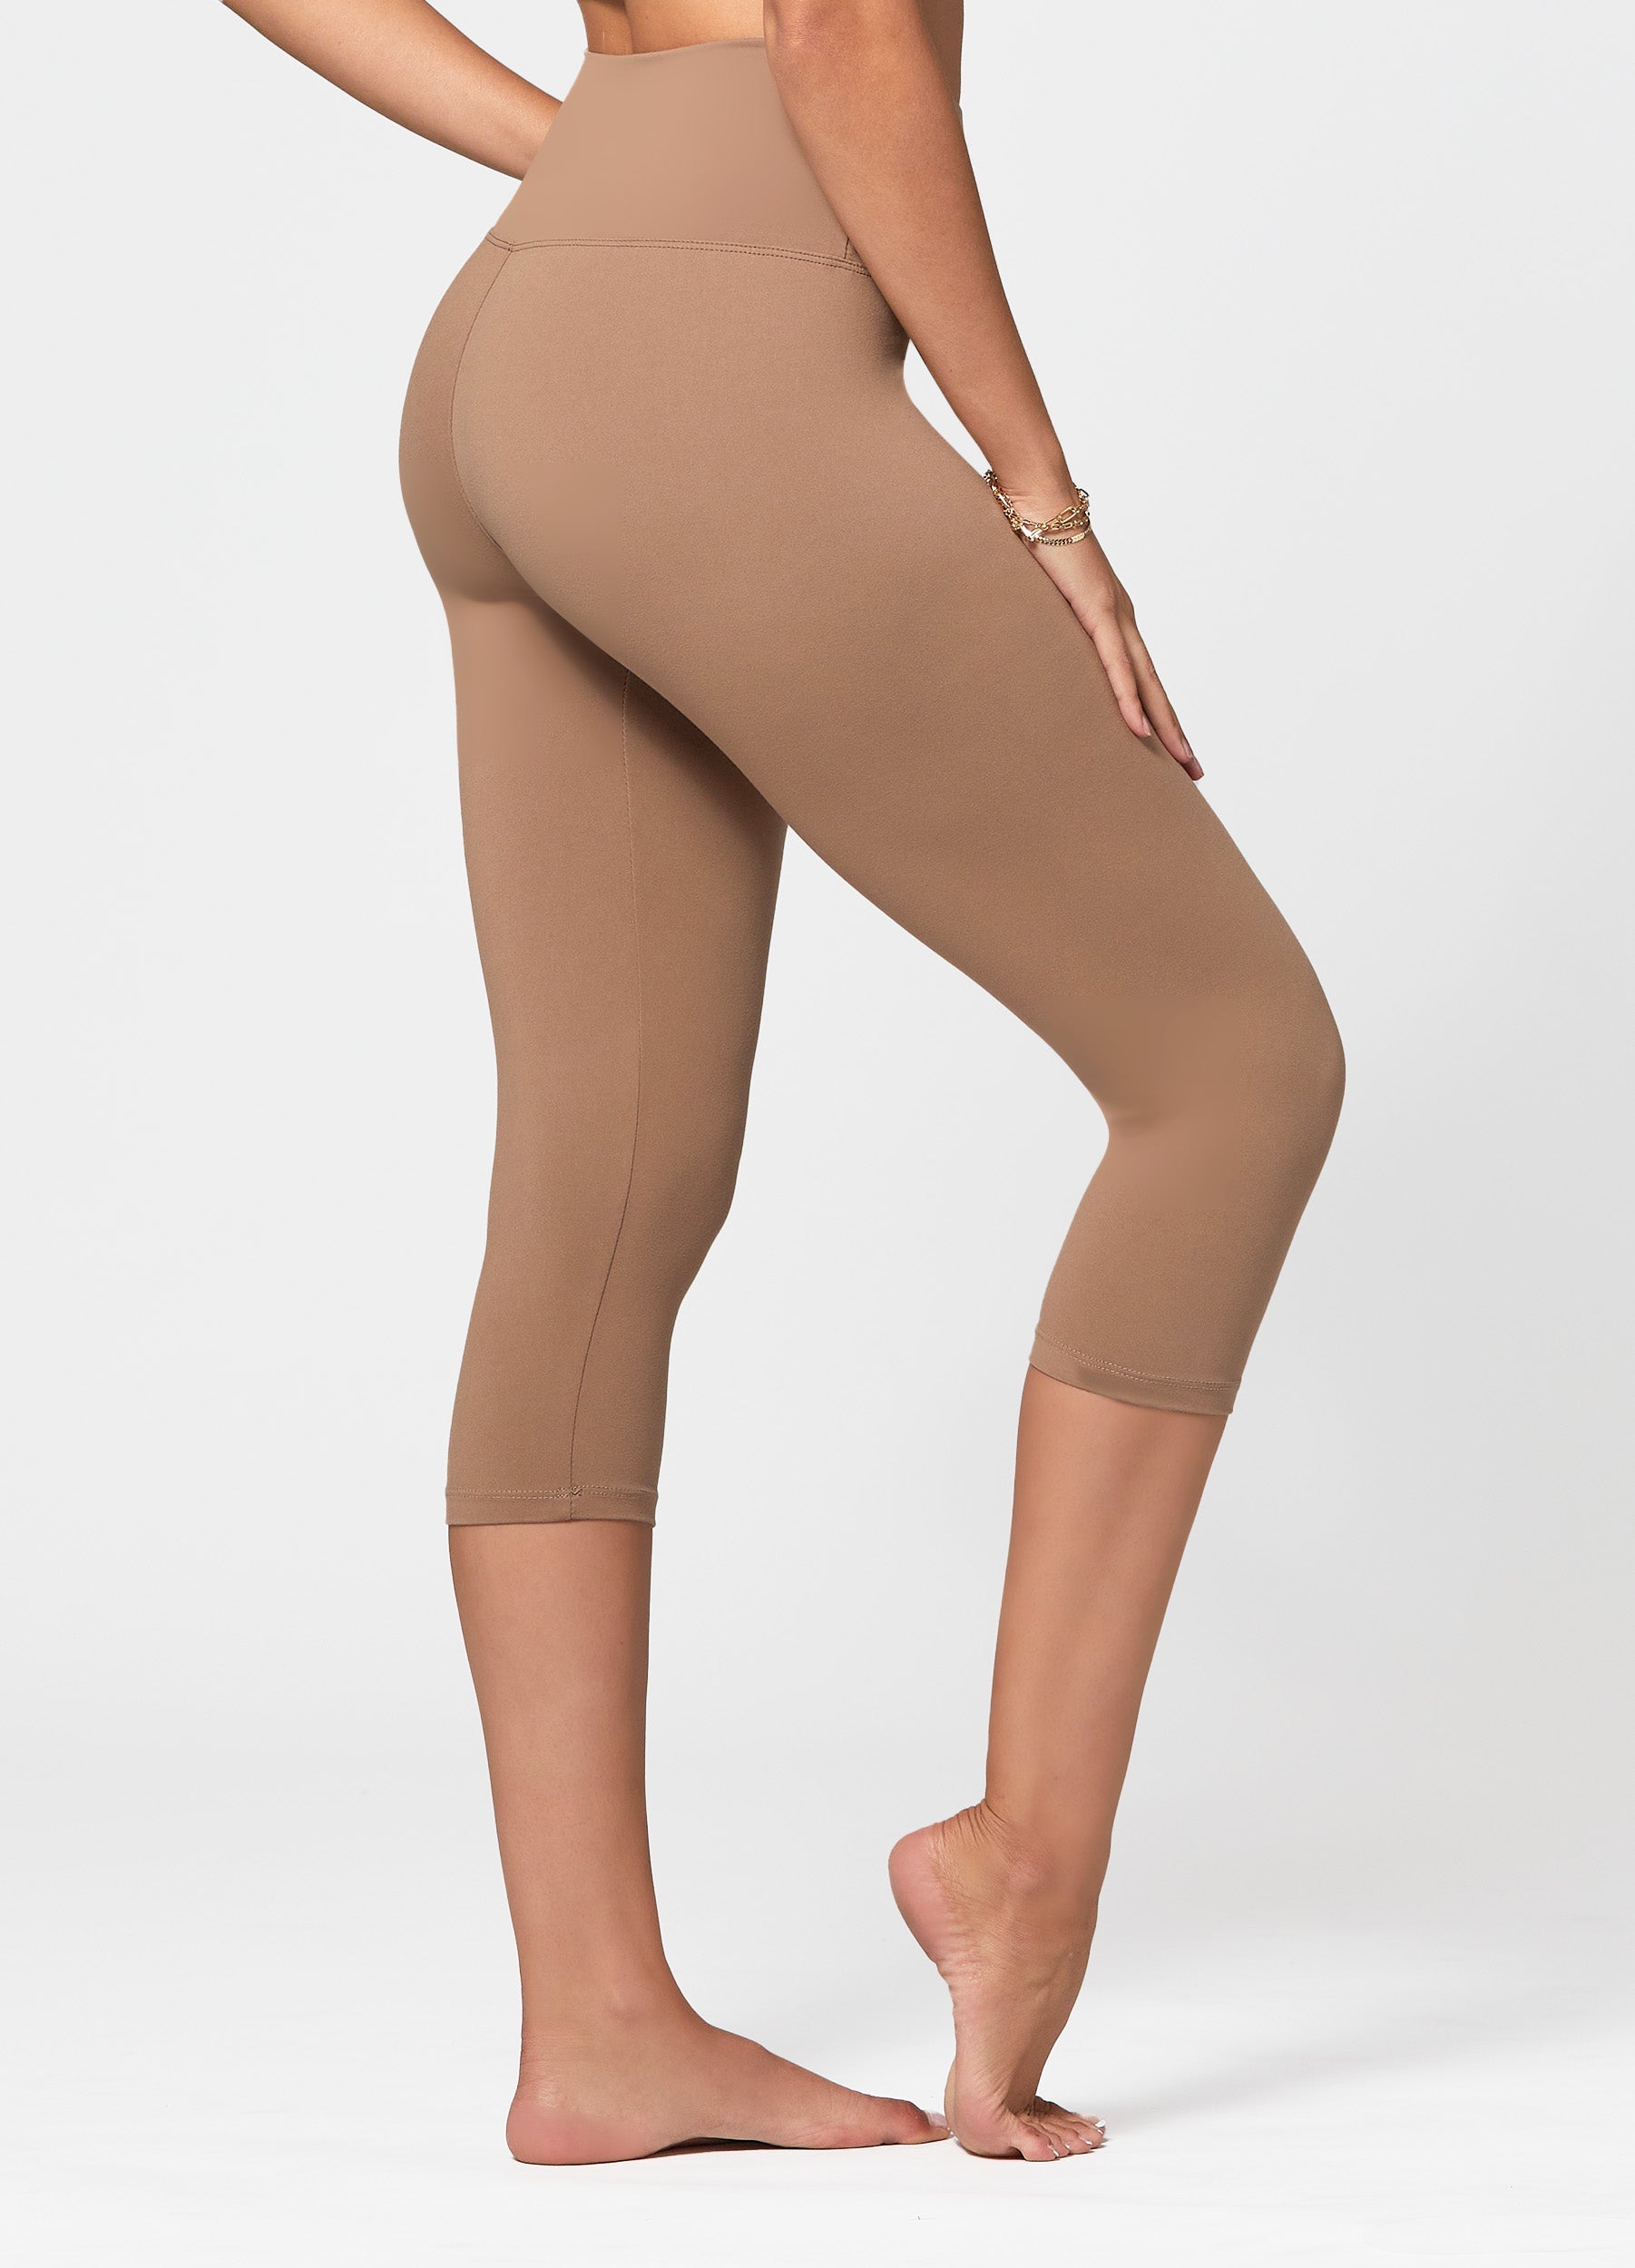 Conceited Women's Ivy Buttery Soft High Waist Basic Leggings 